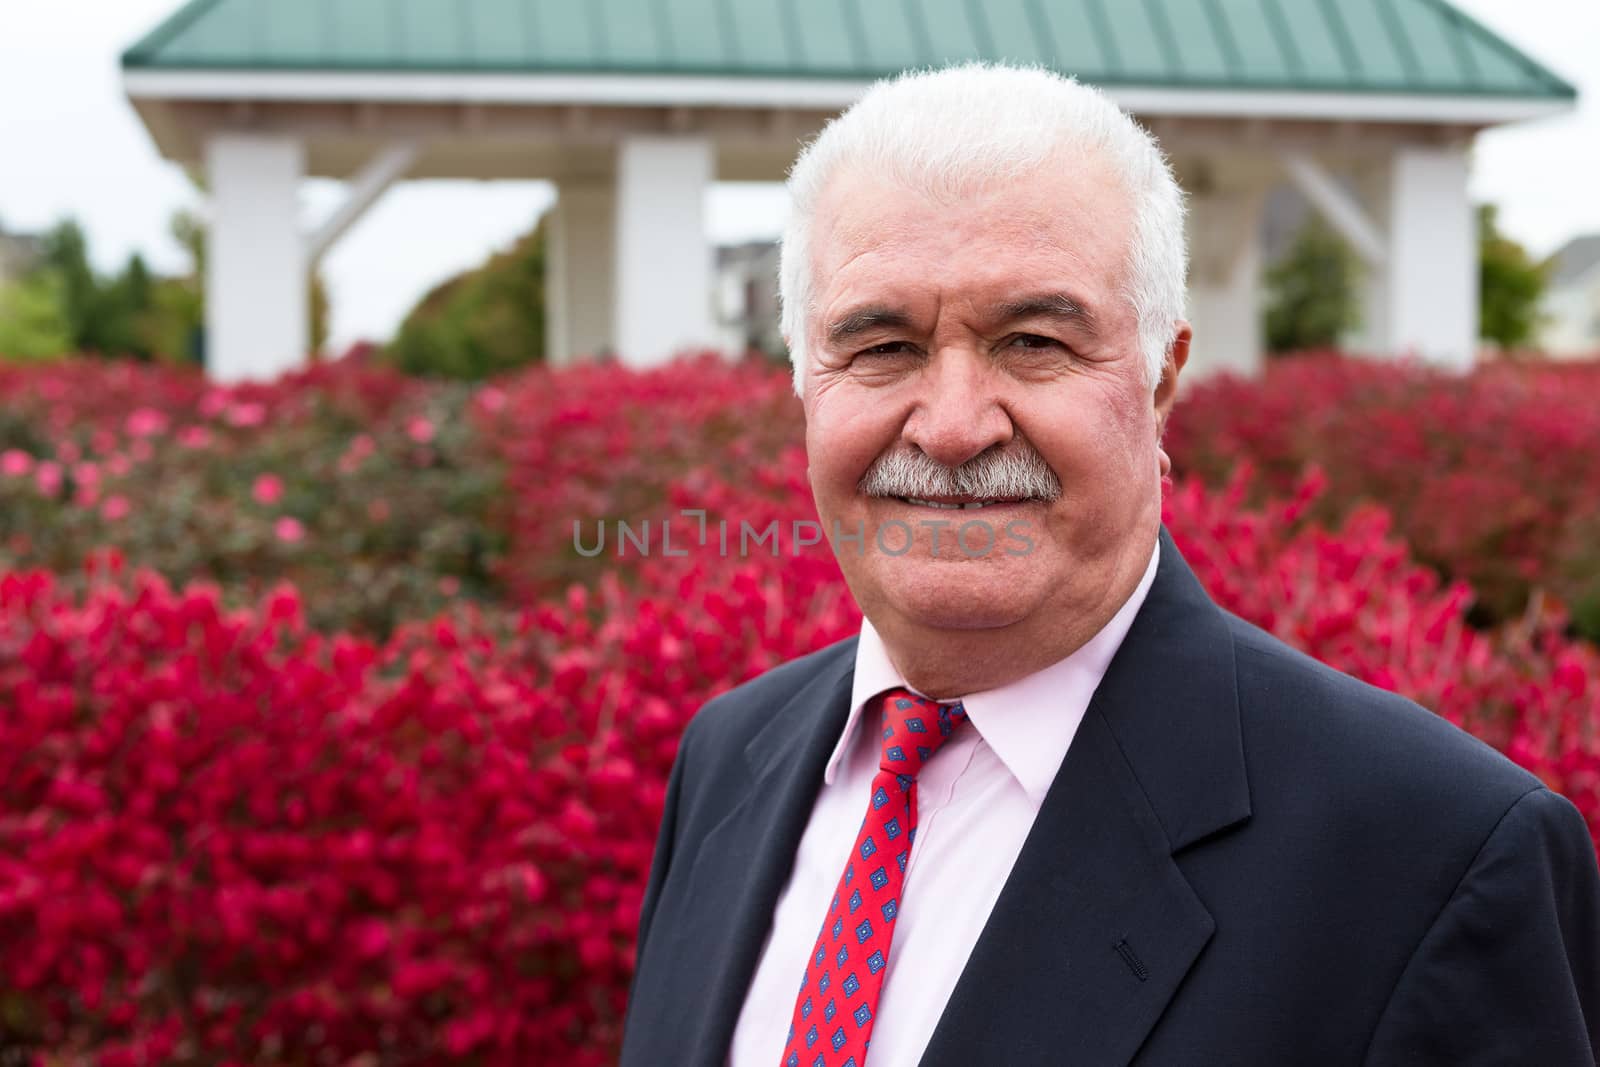 White hair Senior Businessman outside by the red burning bushes